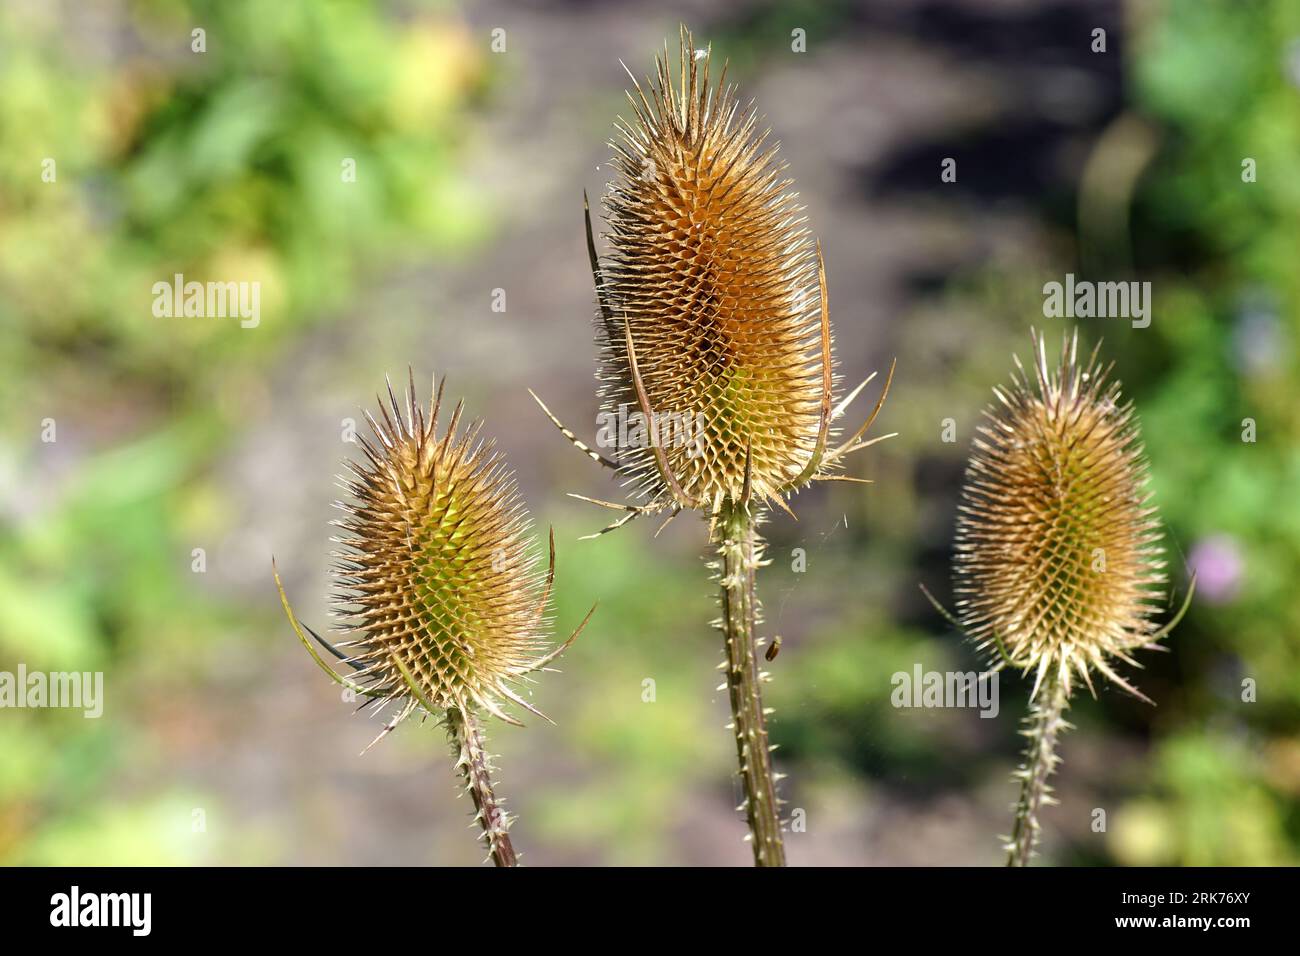 Wild teasel or fuller's teasel, Dipsacus fullonum (Dipsacus sativus). Detail of the spiny and conical heads of the carders thistle. Summer, August. Stock Photo